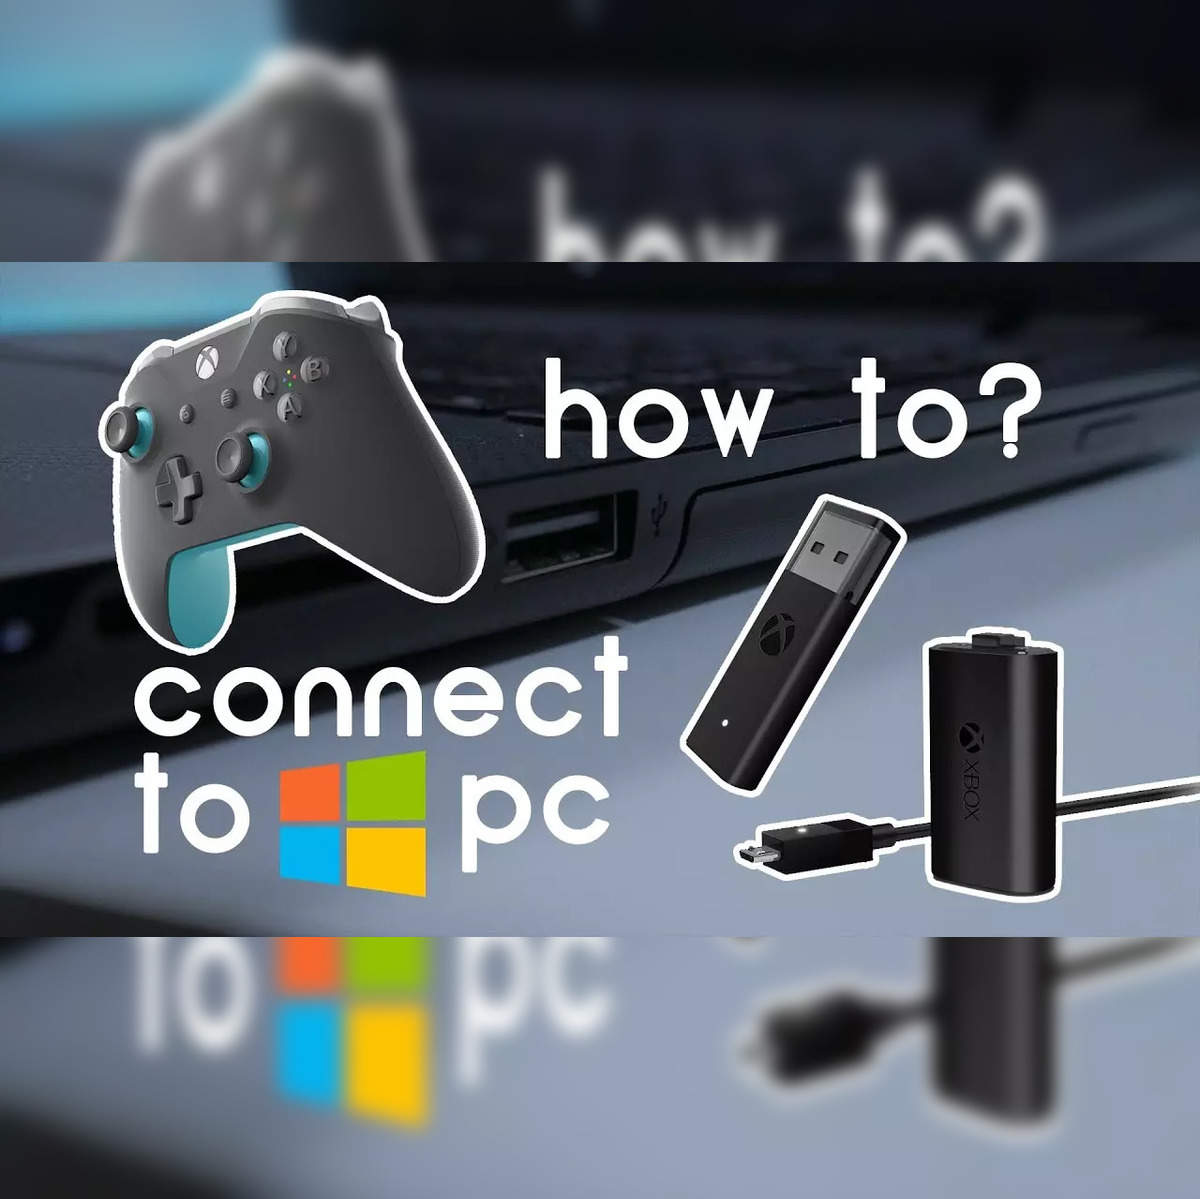 xbox: Here's how you can connect the Xbox controller to the PC